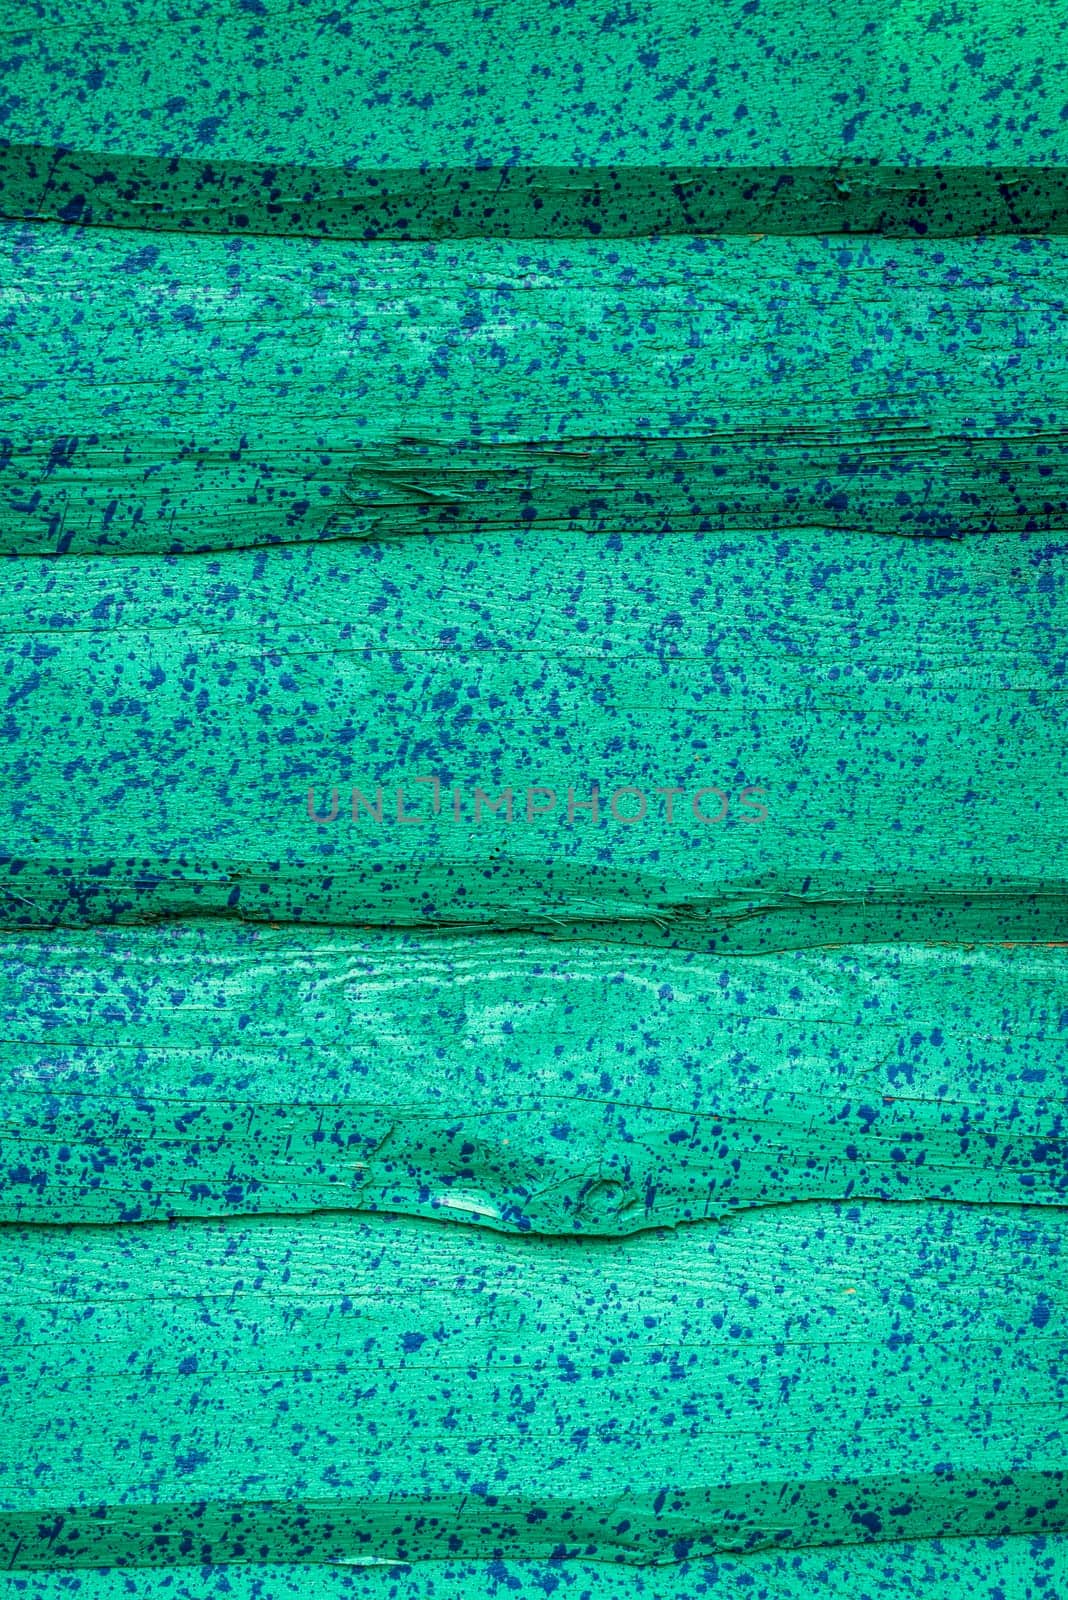 decorative wooden house wall painted green and splashed with blue paint